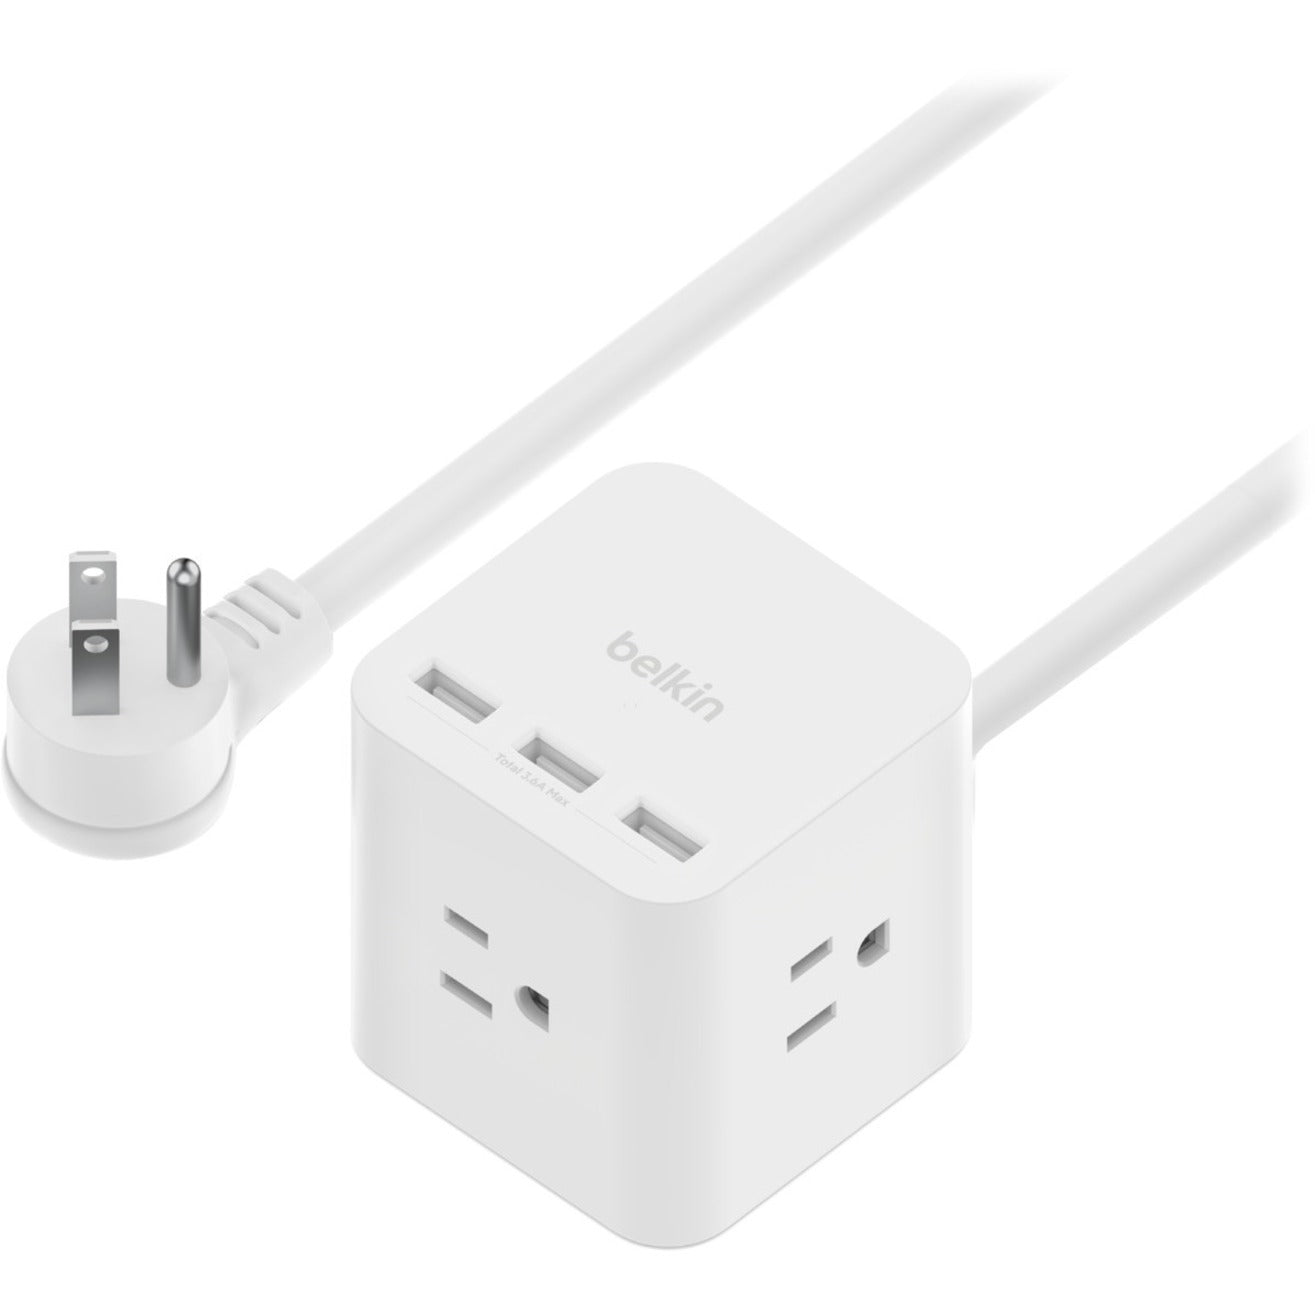 Belkin SRA006P3TT5 3-Outlet Power Cube with 5-Foot Cord and USB-A Ports, Desk Mountable Power Strip